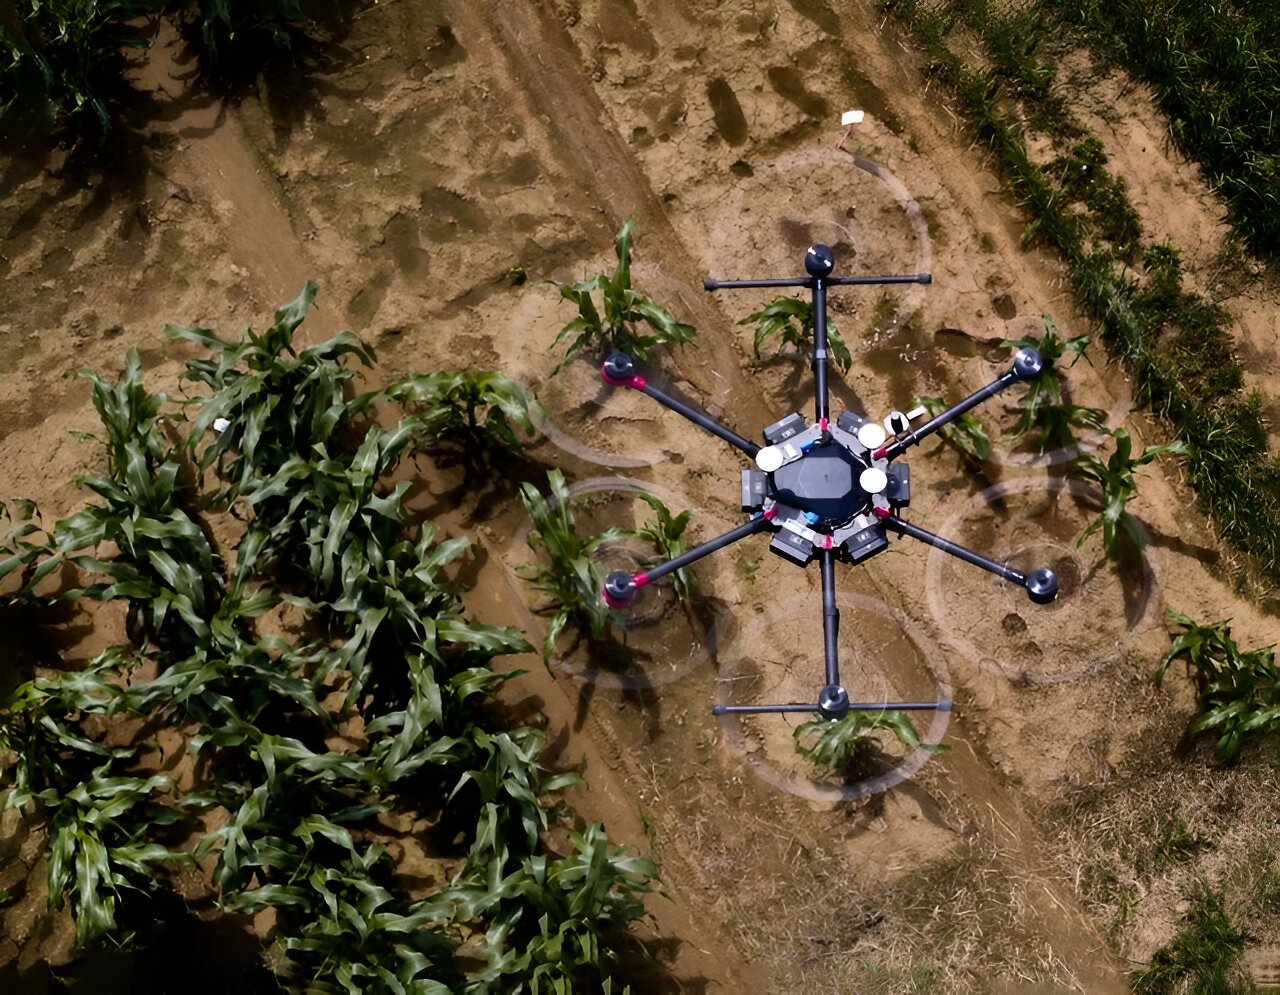 AI shows how field crops develop: Software can simulate future growth based on a single initial image